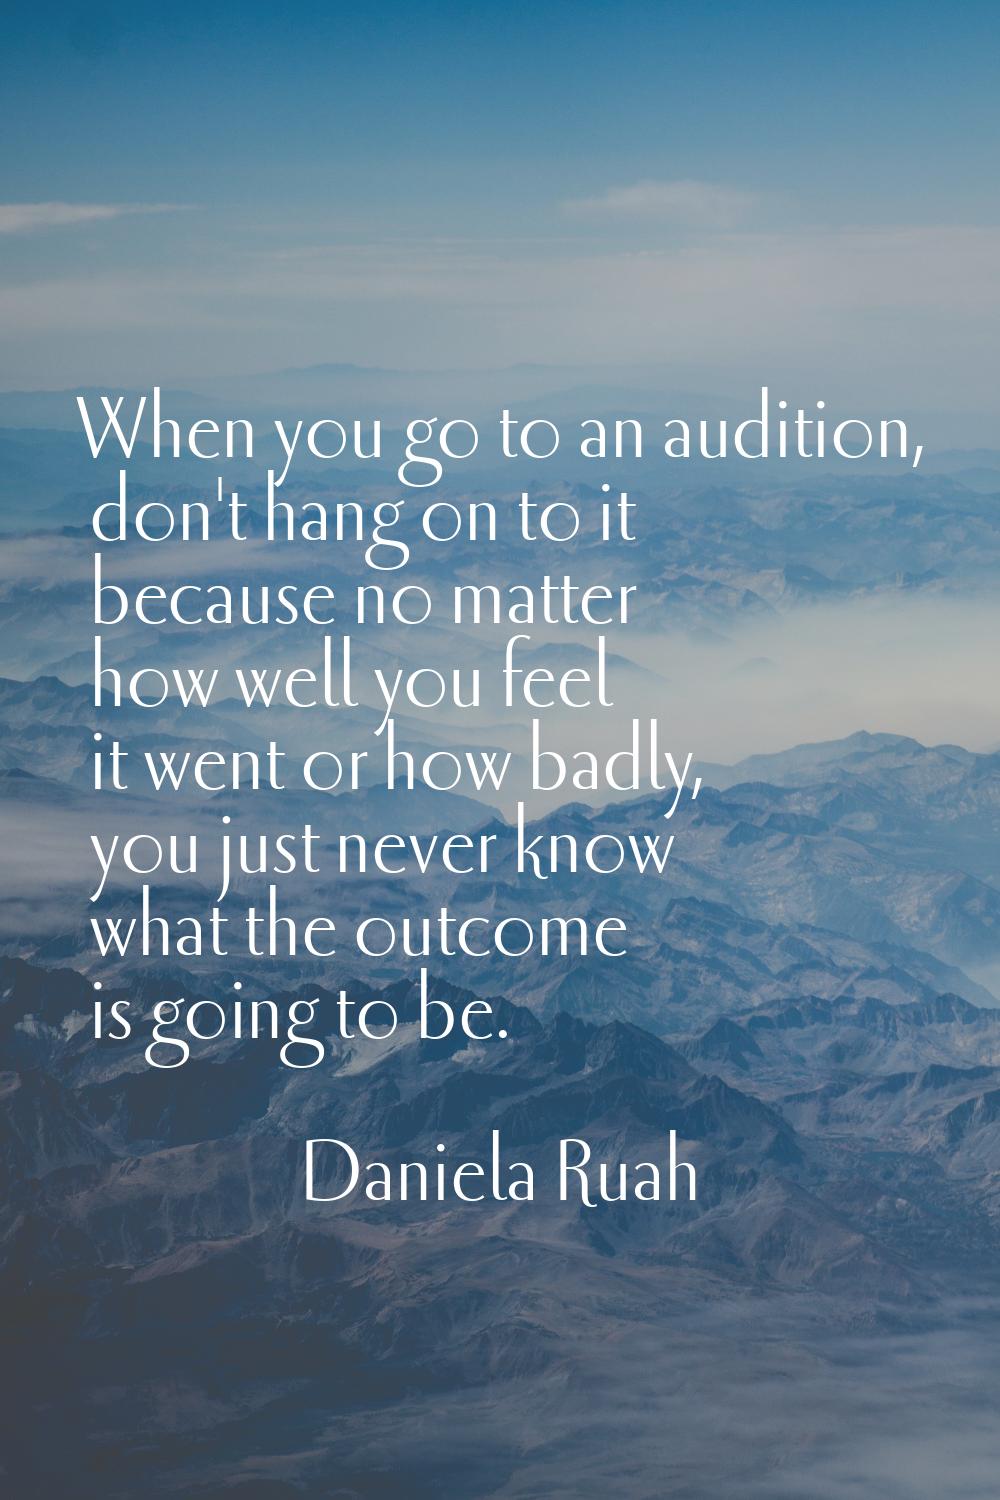 When you go to an audition, don't hang on to it because no matter how well you feel it went or how 